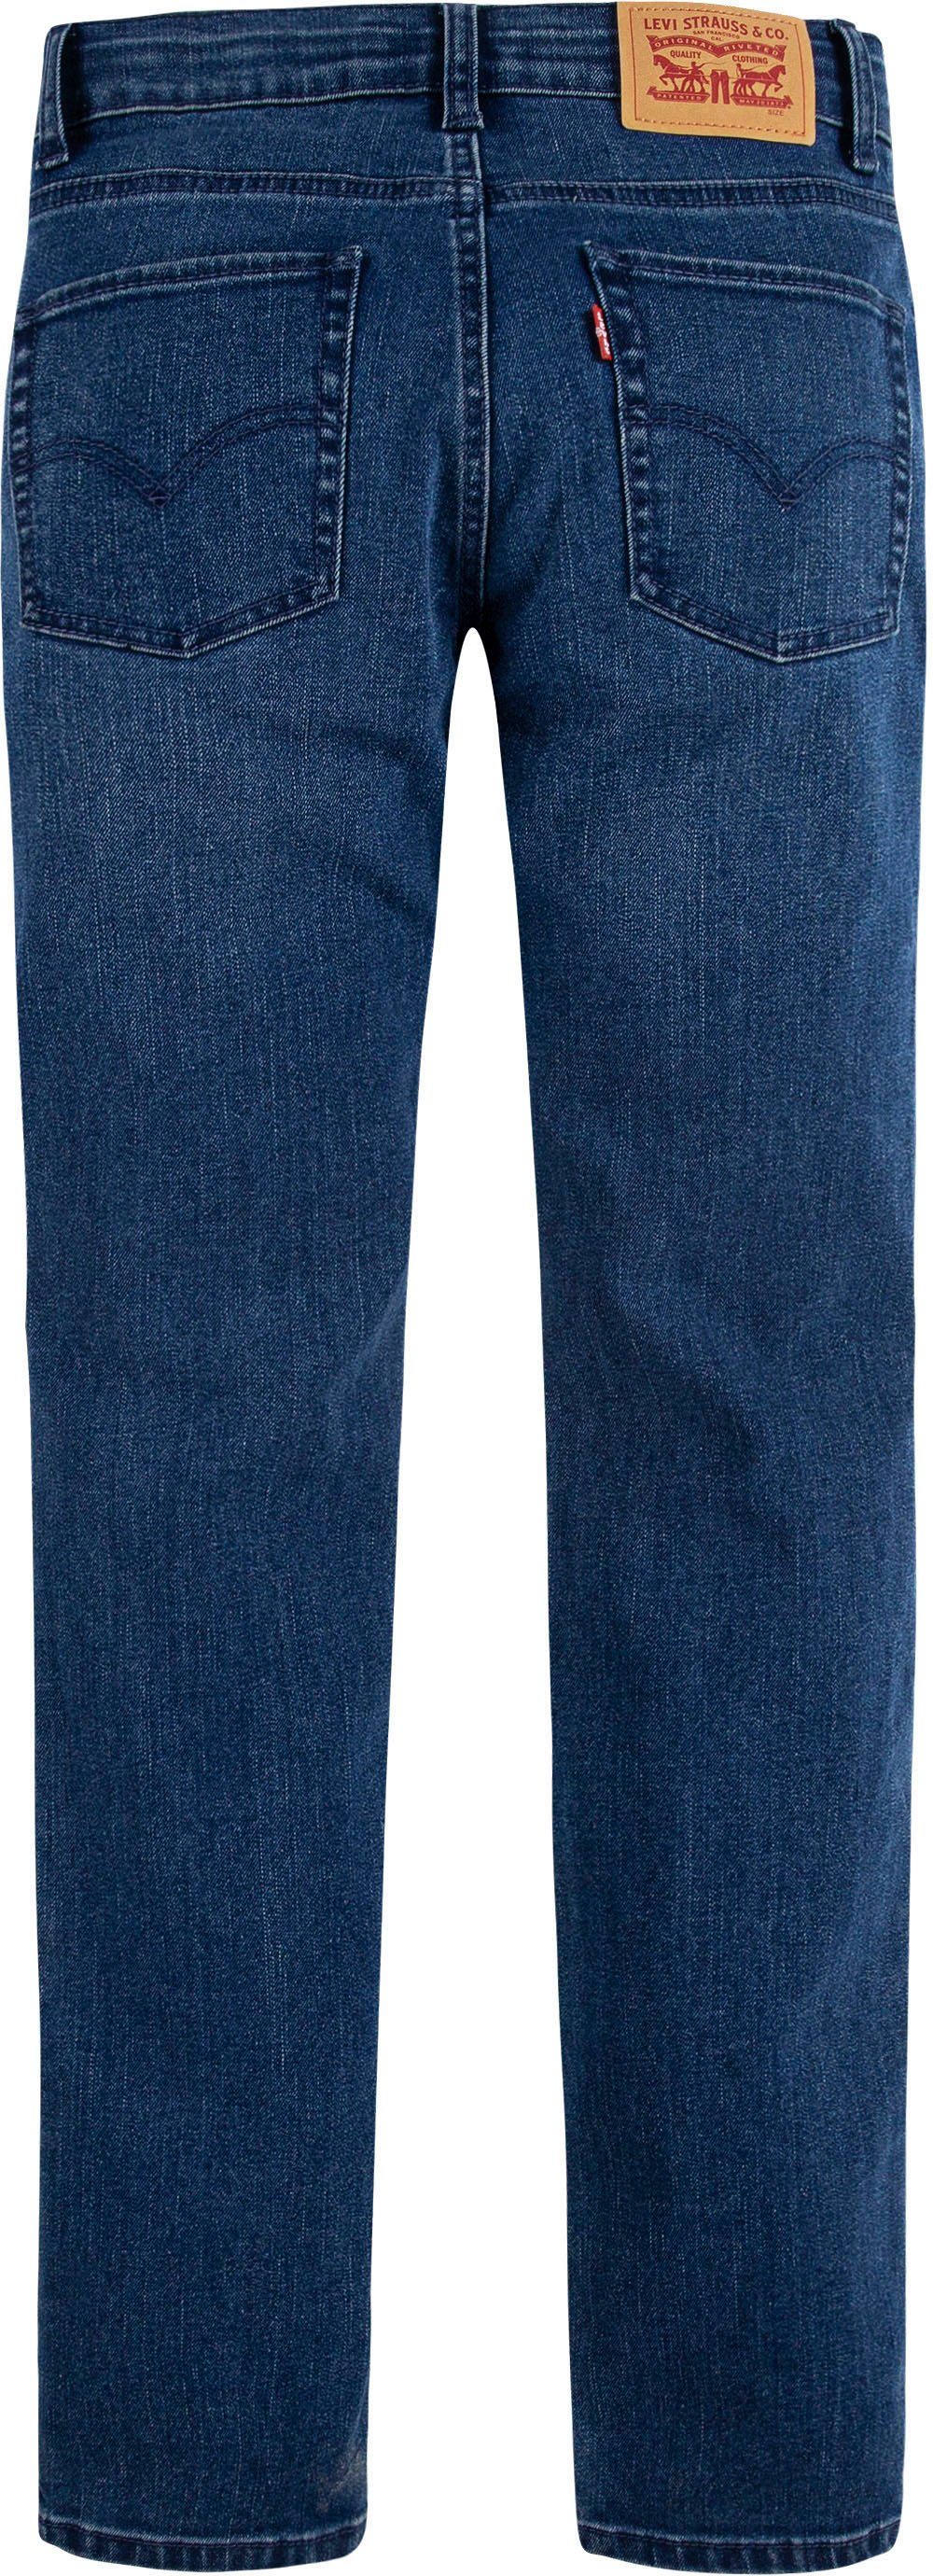 Skinny-fit-Jeans Levi's® for heavy 510 used SKINNY Kids blue FIT BOYS JEANS